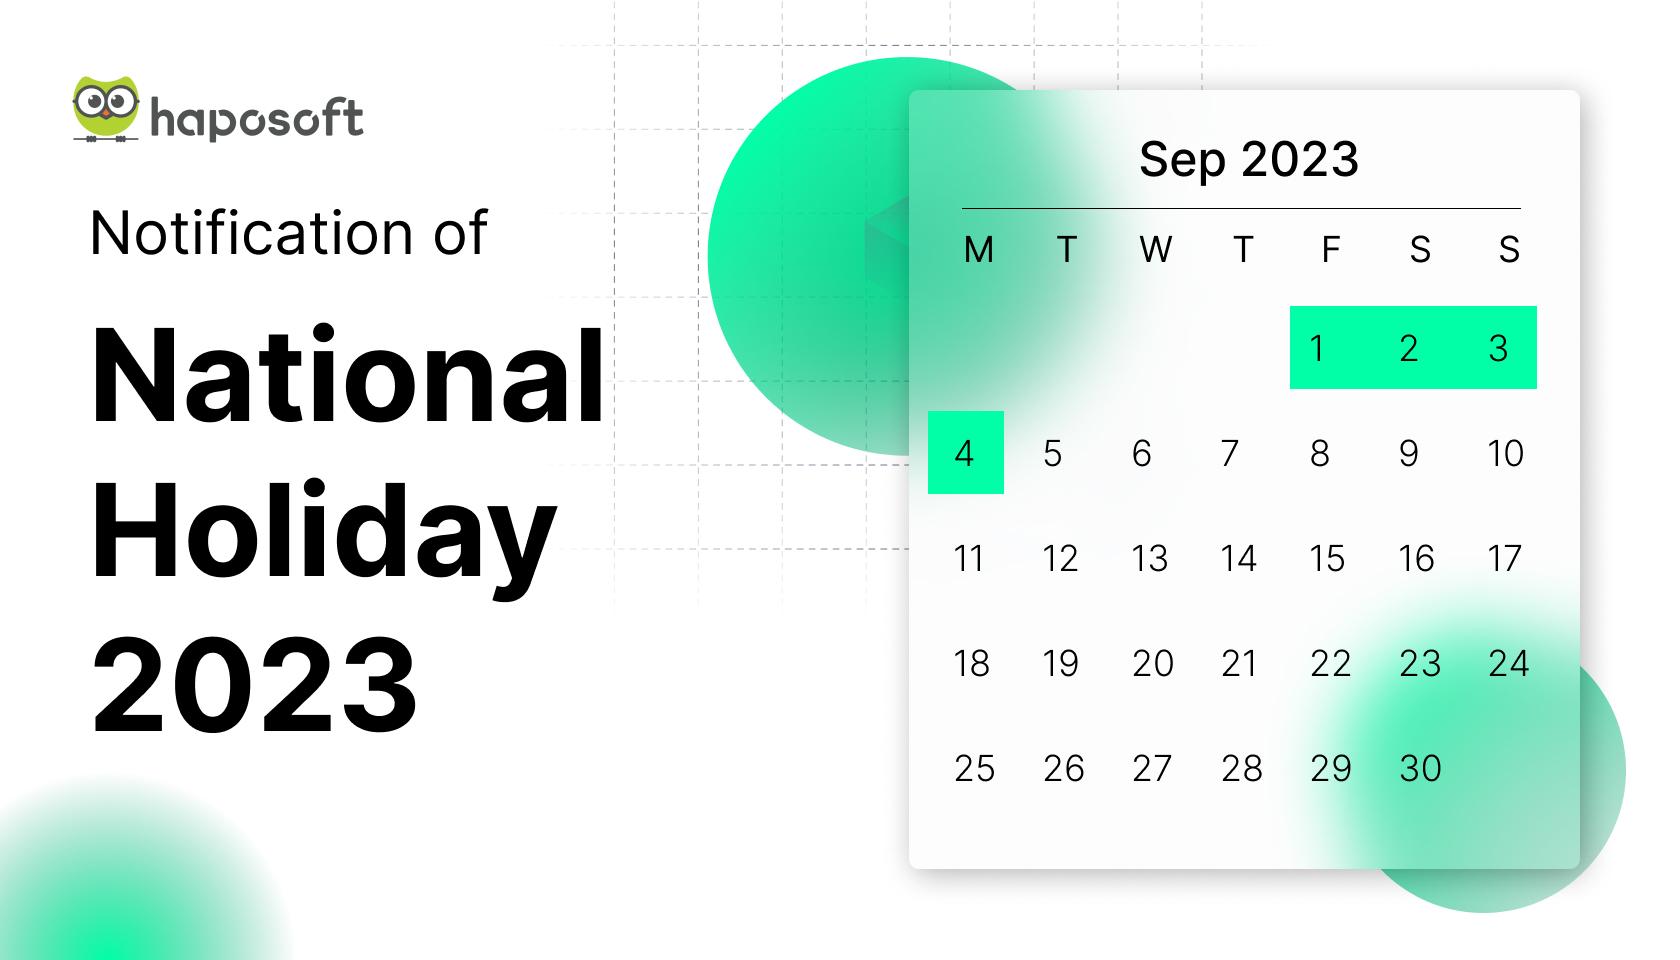 Notification of National Holiday 2023